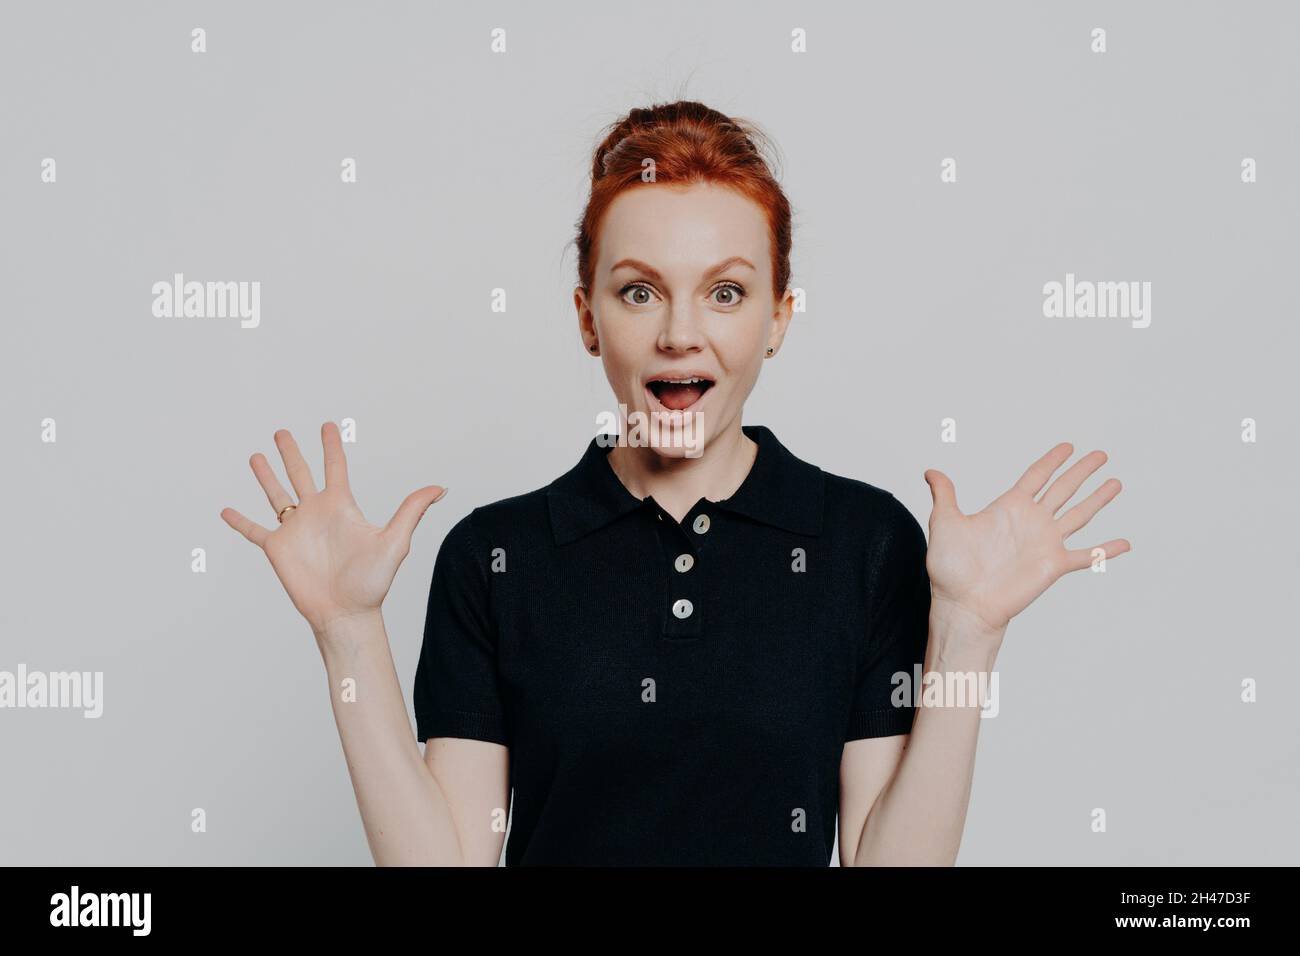 Young surprised emotional ginger girl raising hands and opening mouth with shocked face expression Stock Photo